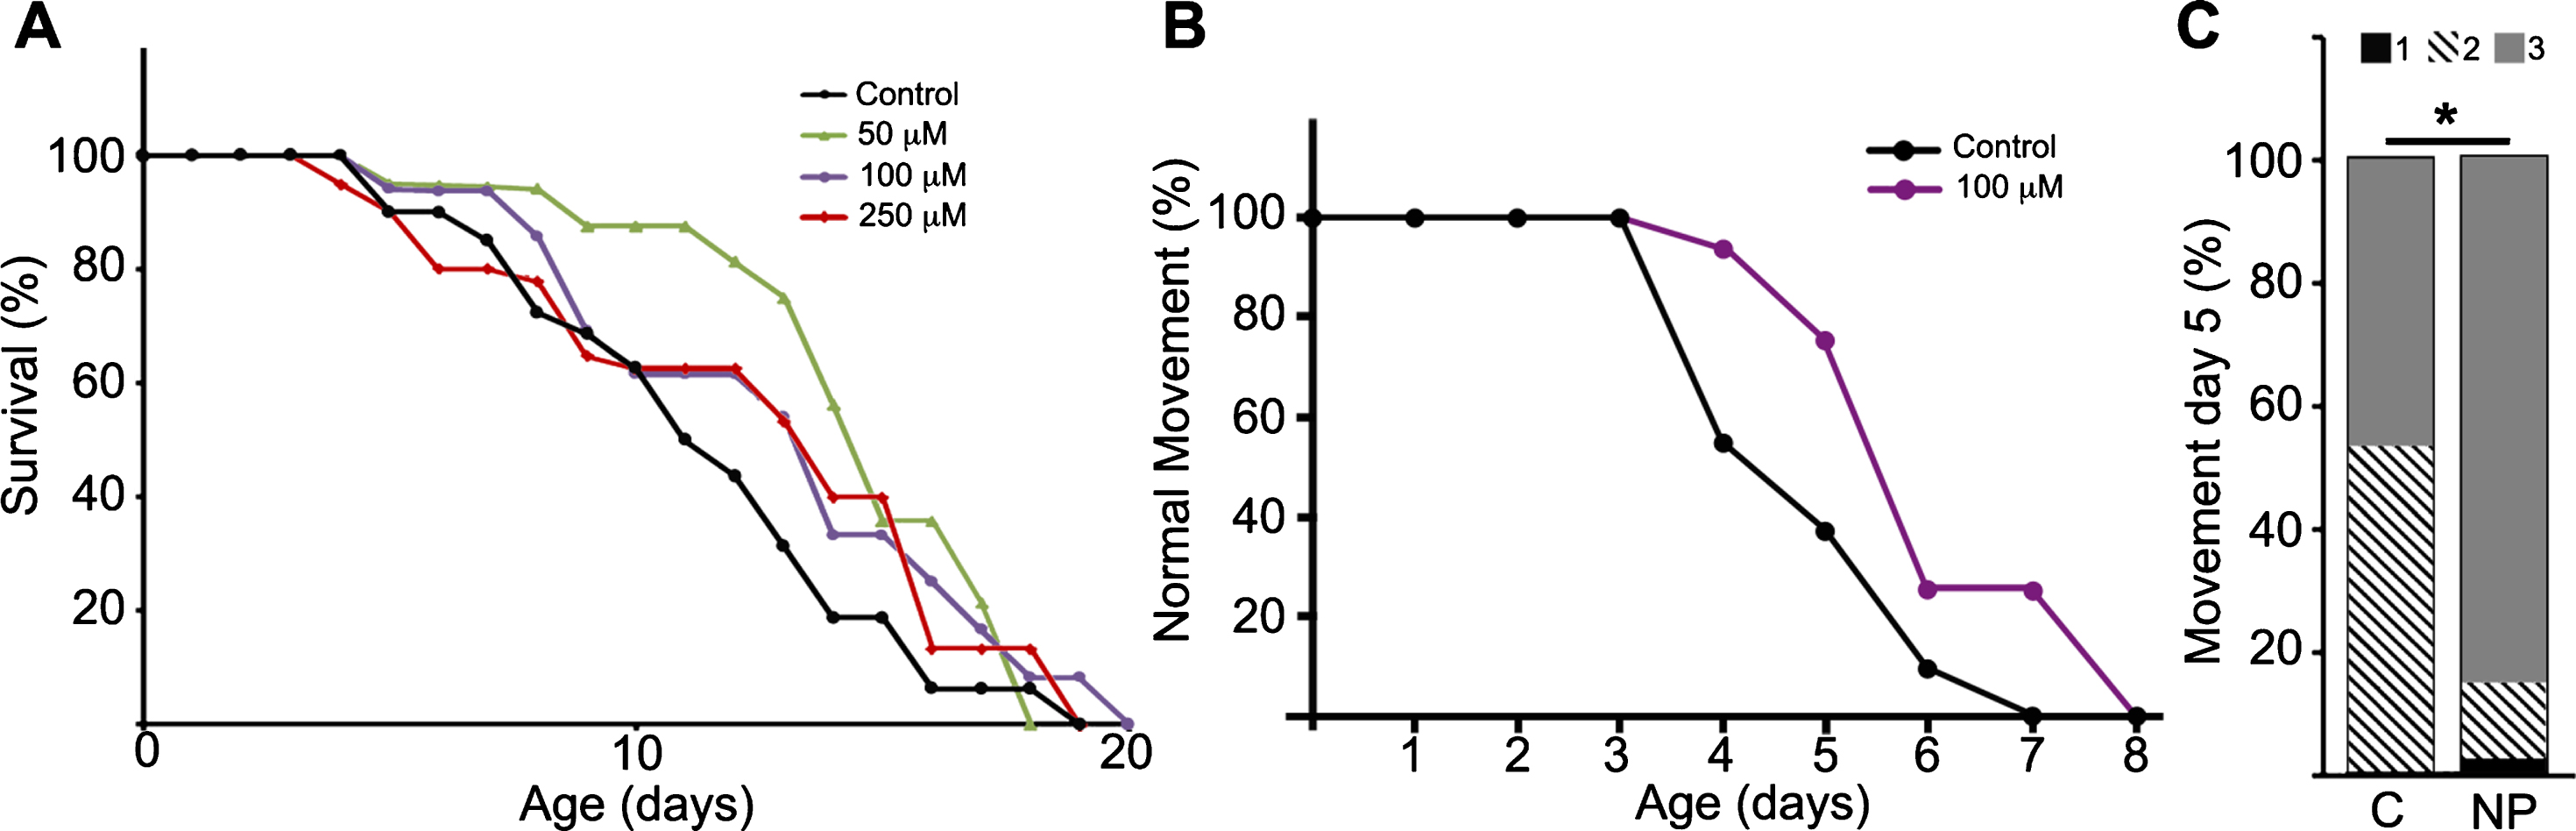 NP103 shows minor effects on lifespan extension of pathogenic tau aex-3/T337 transgenic strain but improves their paralysis phenotype. A) Dose–response Kaplan–Meier survival curve of synchronized mutant aex-3/T337 worms exposed to different doses (0–250 μM) of NP103. B) Curve representing the percentage of aex-3/T337 worms non-treated (black line) or NP103 100 μM treated (purple line) showing wild type-like movement along time. One representative experiment out of three independent assays are shown in (A) and (B); (n = 20 worms per experiment and dose). C) Statistical analysis of aex-3/T337 worms motility after 5 days of treatment with vehicle (control, C) or 100 μM NP103 (NP). Motility was scored assigning different values to worms with normal wild type-like movement (value 3), slow movement (value 2) or paralyzed (value 1). Data show means±s.e.m of three independent experiments (n = 20 worms per experiment). Chi-square test was performed (*p < 0.05).